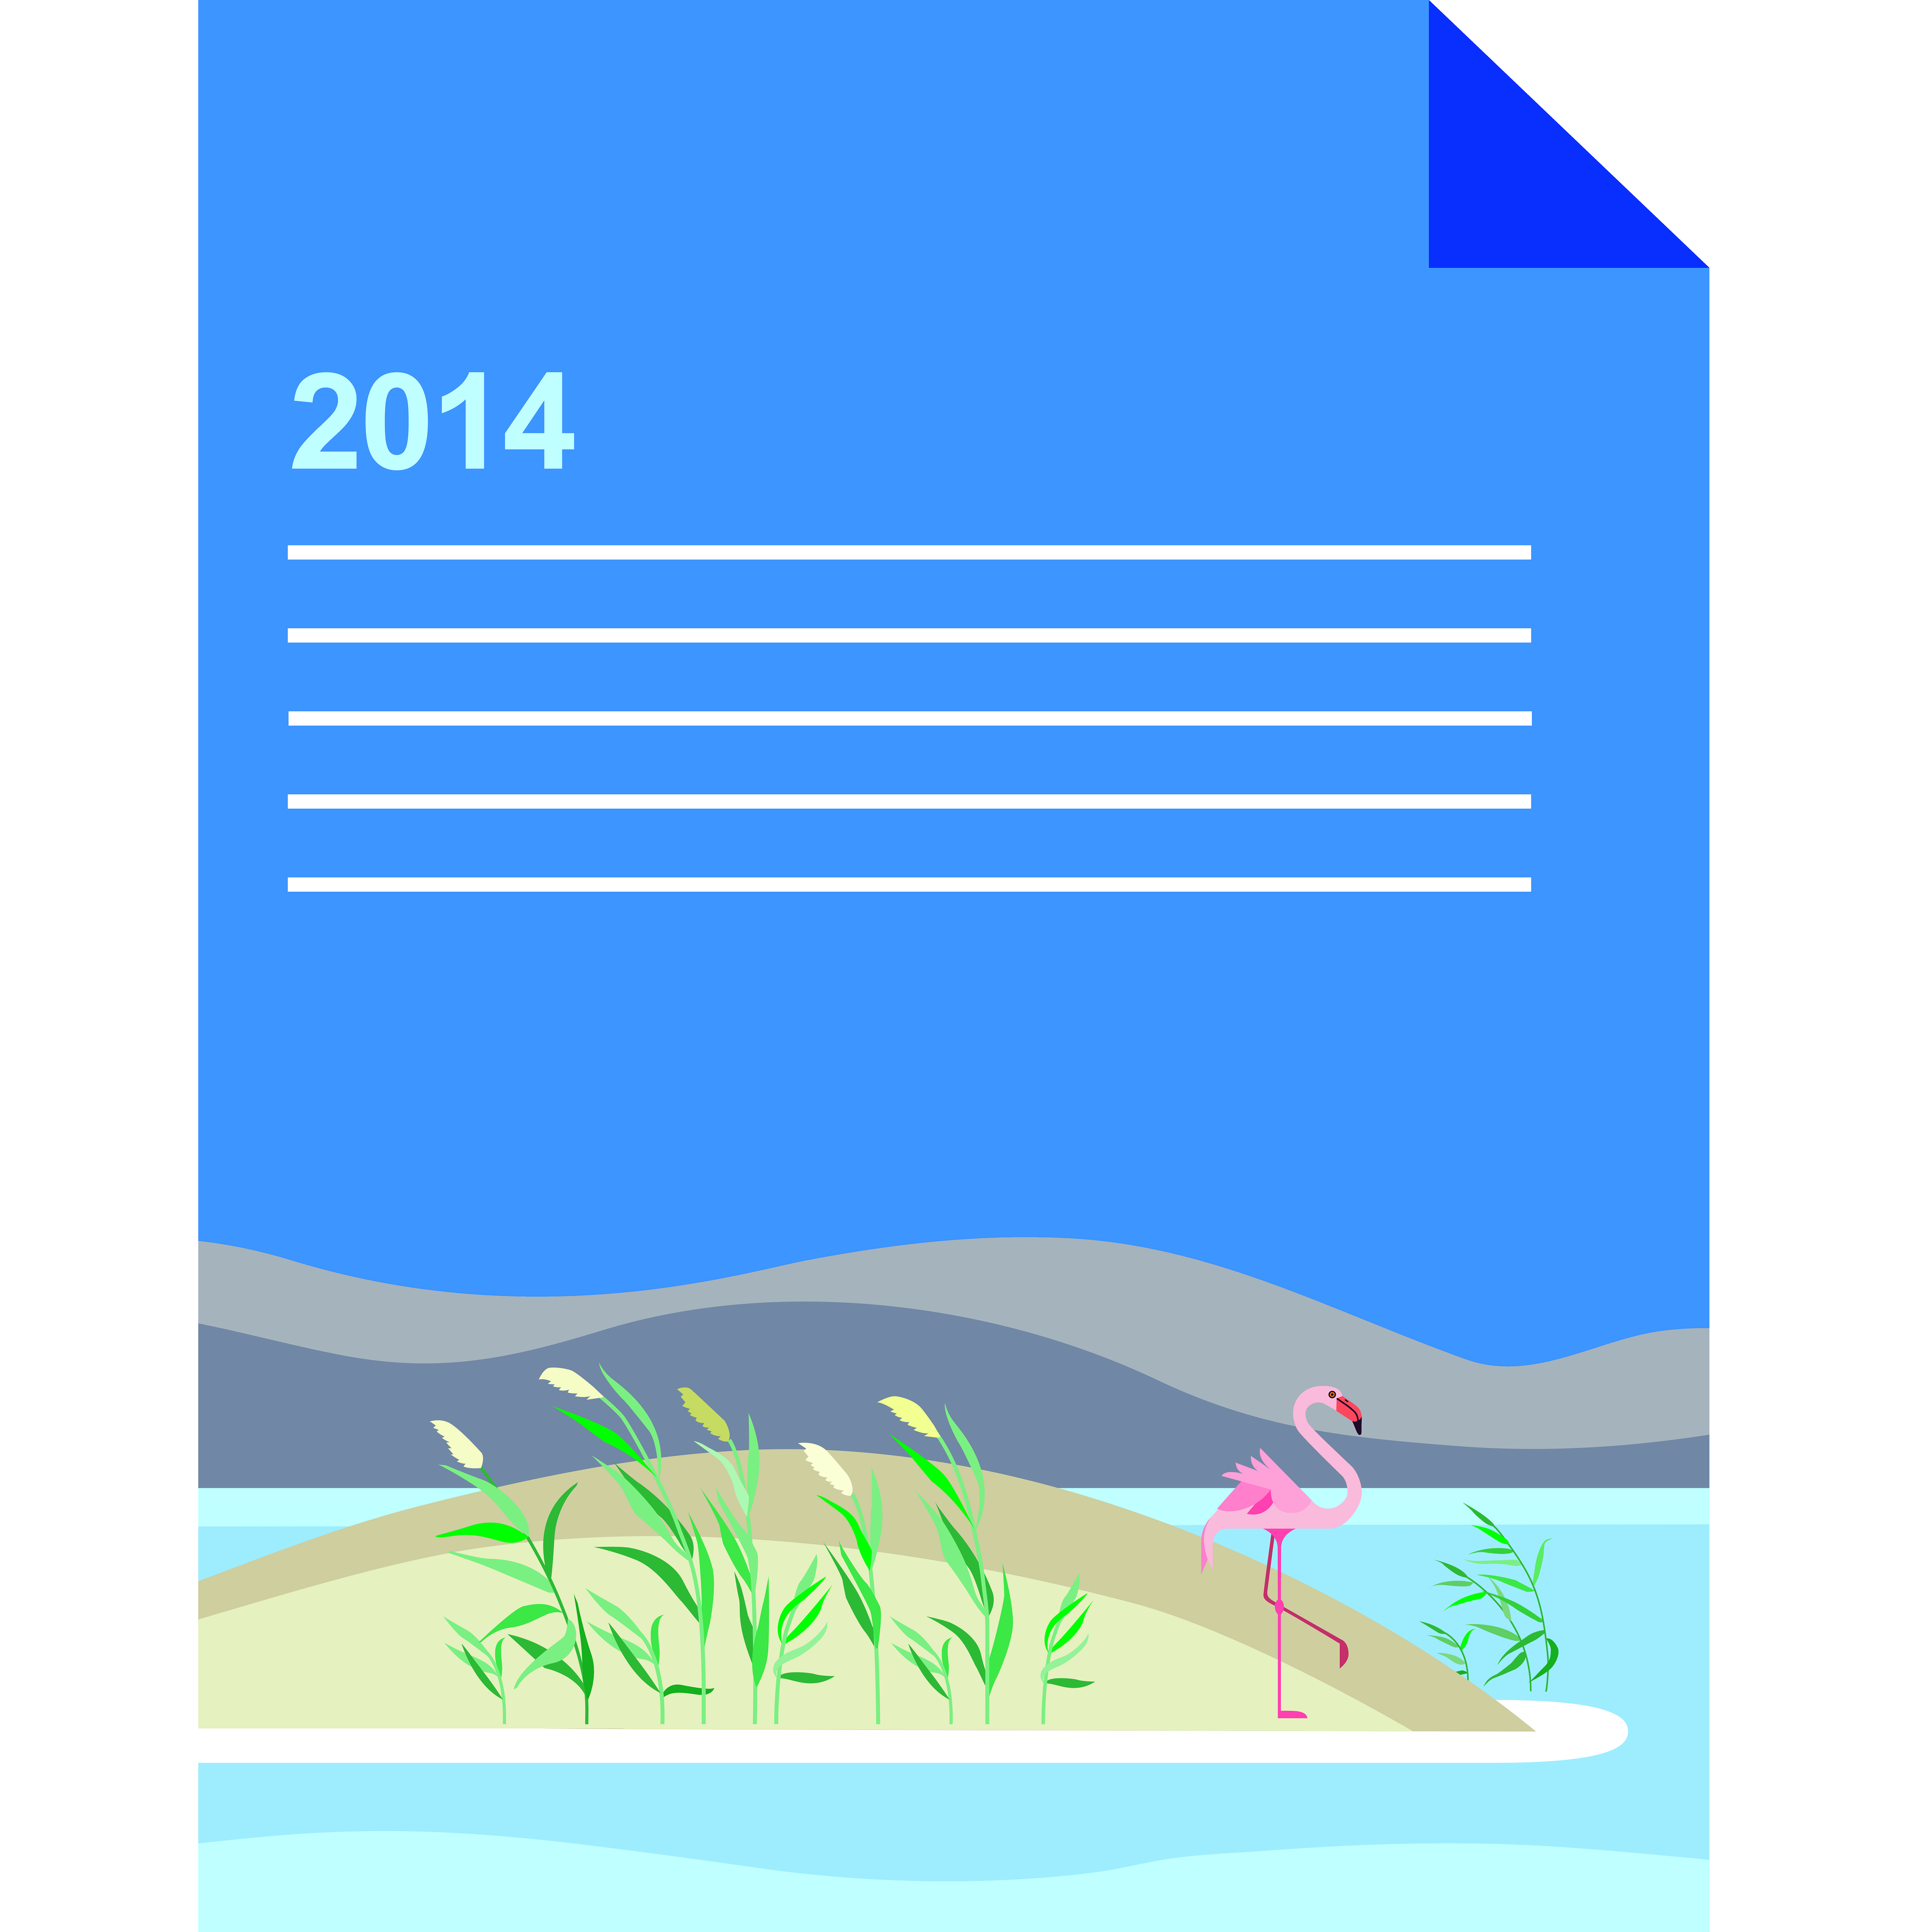 Conservation of Iranian Wetlands 2014 Annual Report